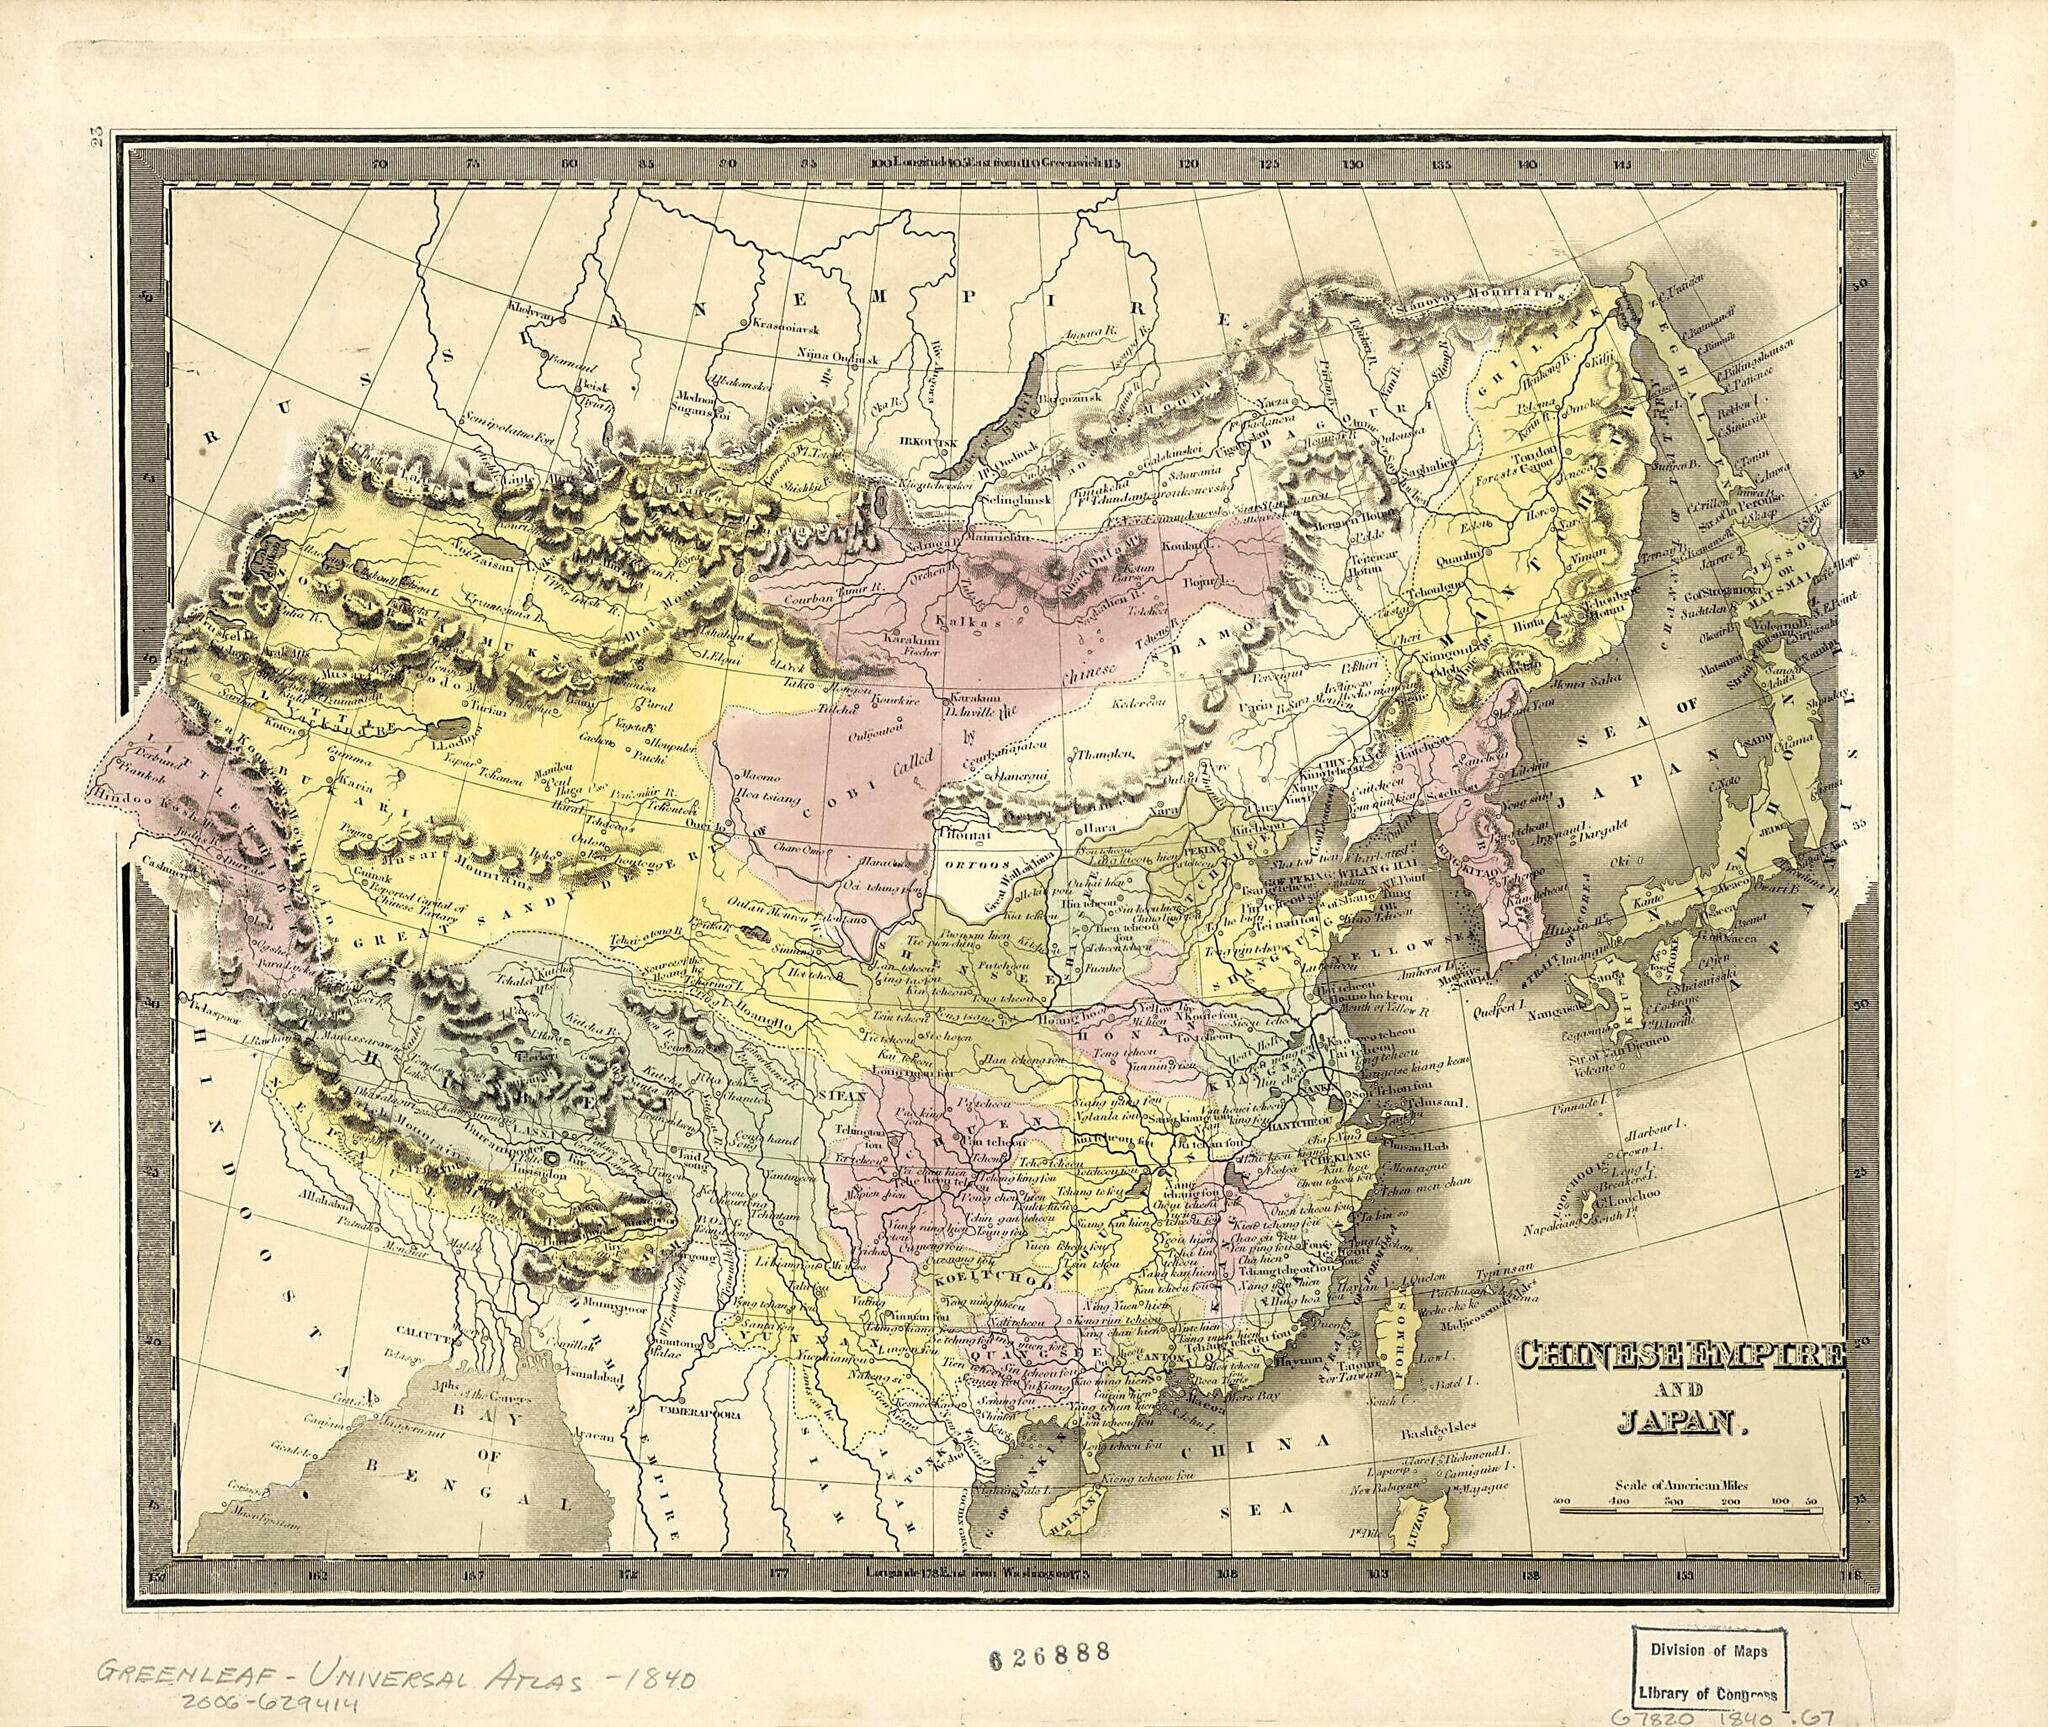 This old map of Chinese Empire and Japan from 1840 was created by J. (Jeremiah) Greenleaf in 1840